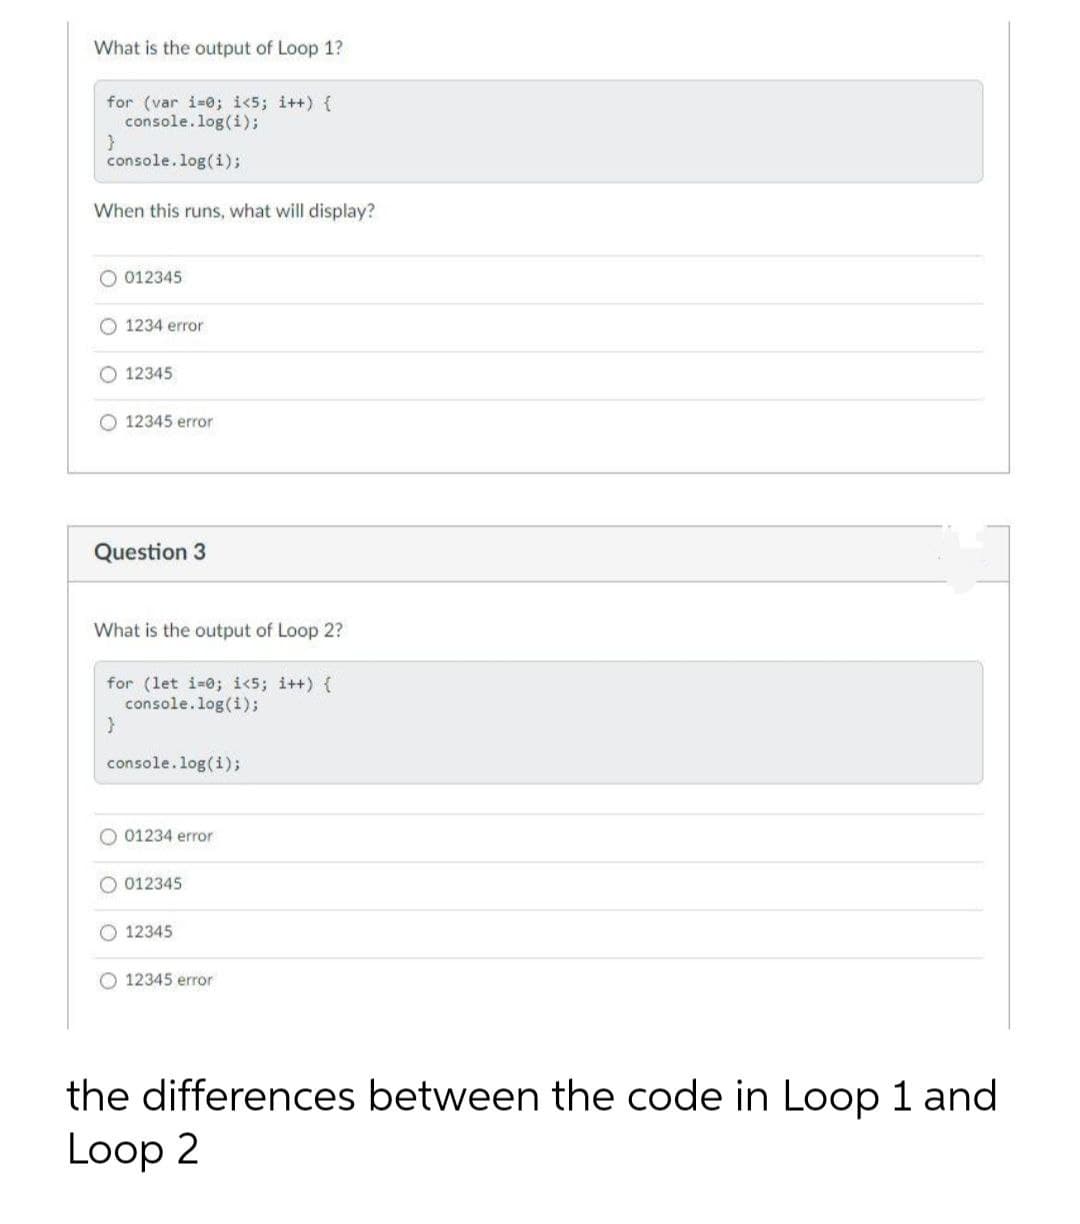 What is the output of Loop 1?
for (var i-0; i<5; i++) {
console.log(i);
}
console.log(i);
When this runs, what will display?
O 012345
O 1234 error
O 12345
O 12345 error
Question 3
What is the output of Loop 2?
for (let i-0; i<5; i++) {
console.log(i);
console.log(i);
O 01234 error
O 012345
O 12345
O 12345 error
the differences between the code in Loop 1 and
Loop 2
